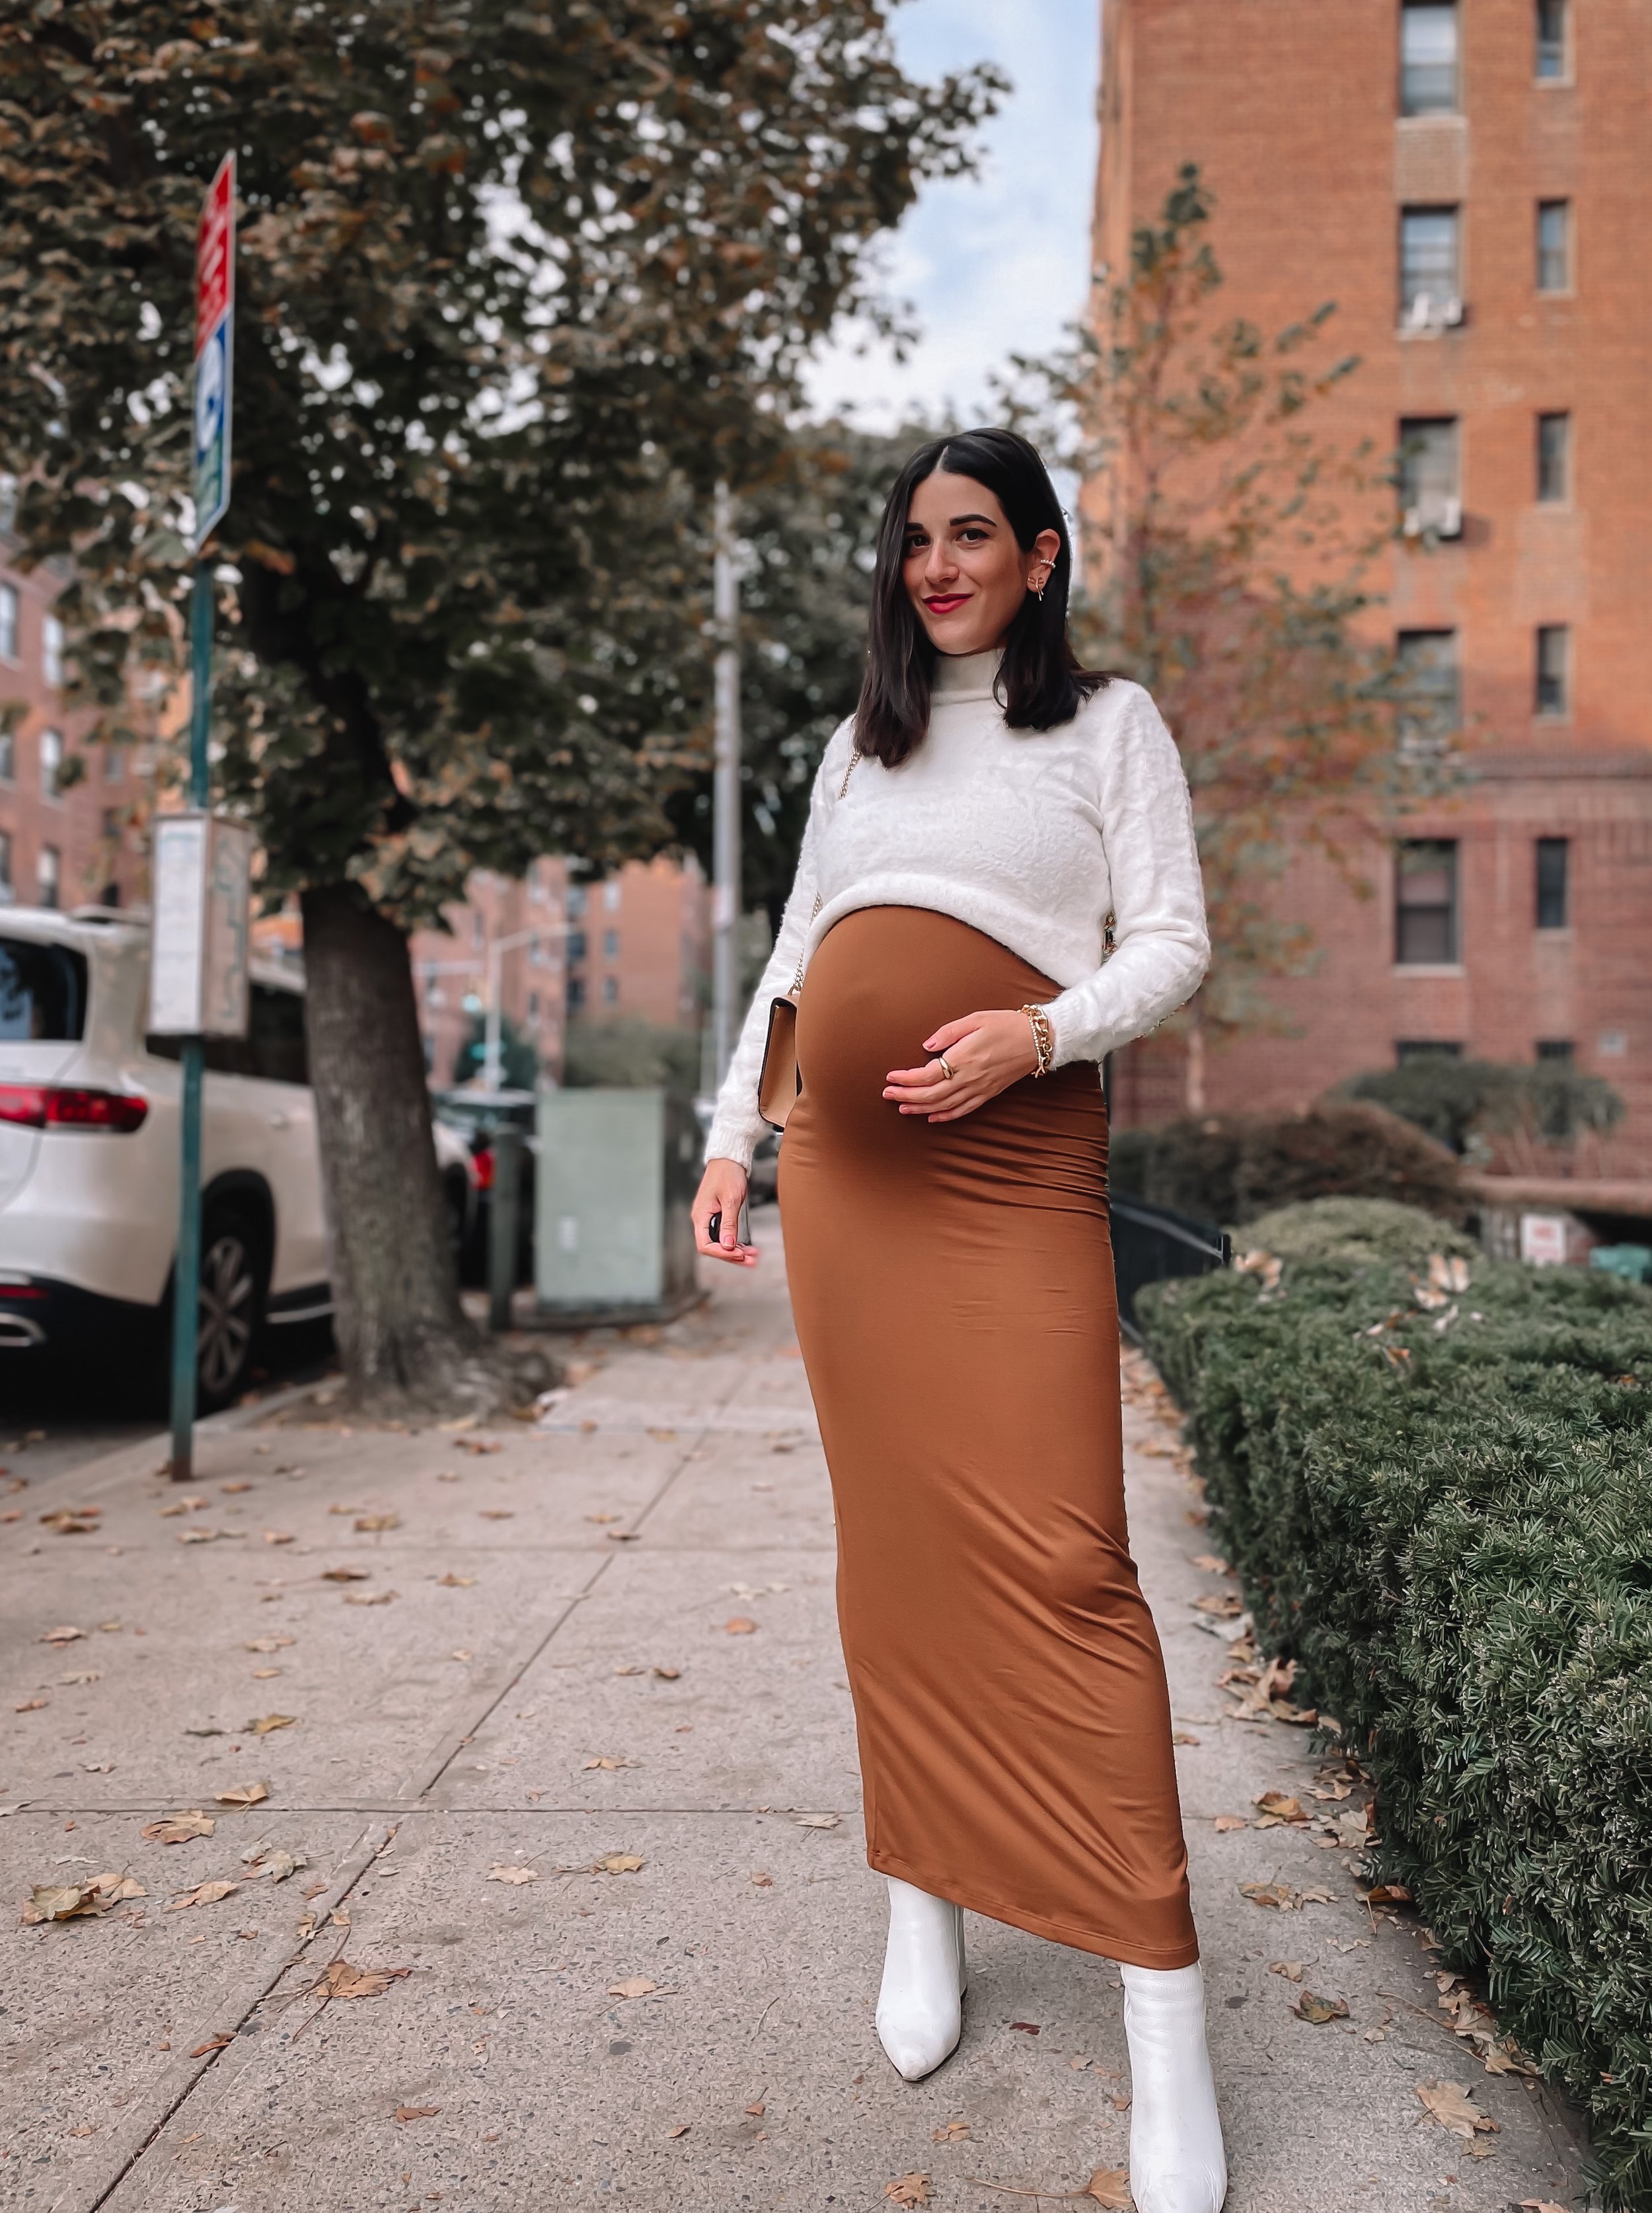 Pregnant Street Style: Maternity Outfit Ideas That Still Look Chic –  StyleCaster